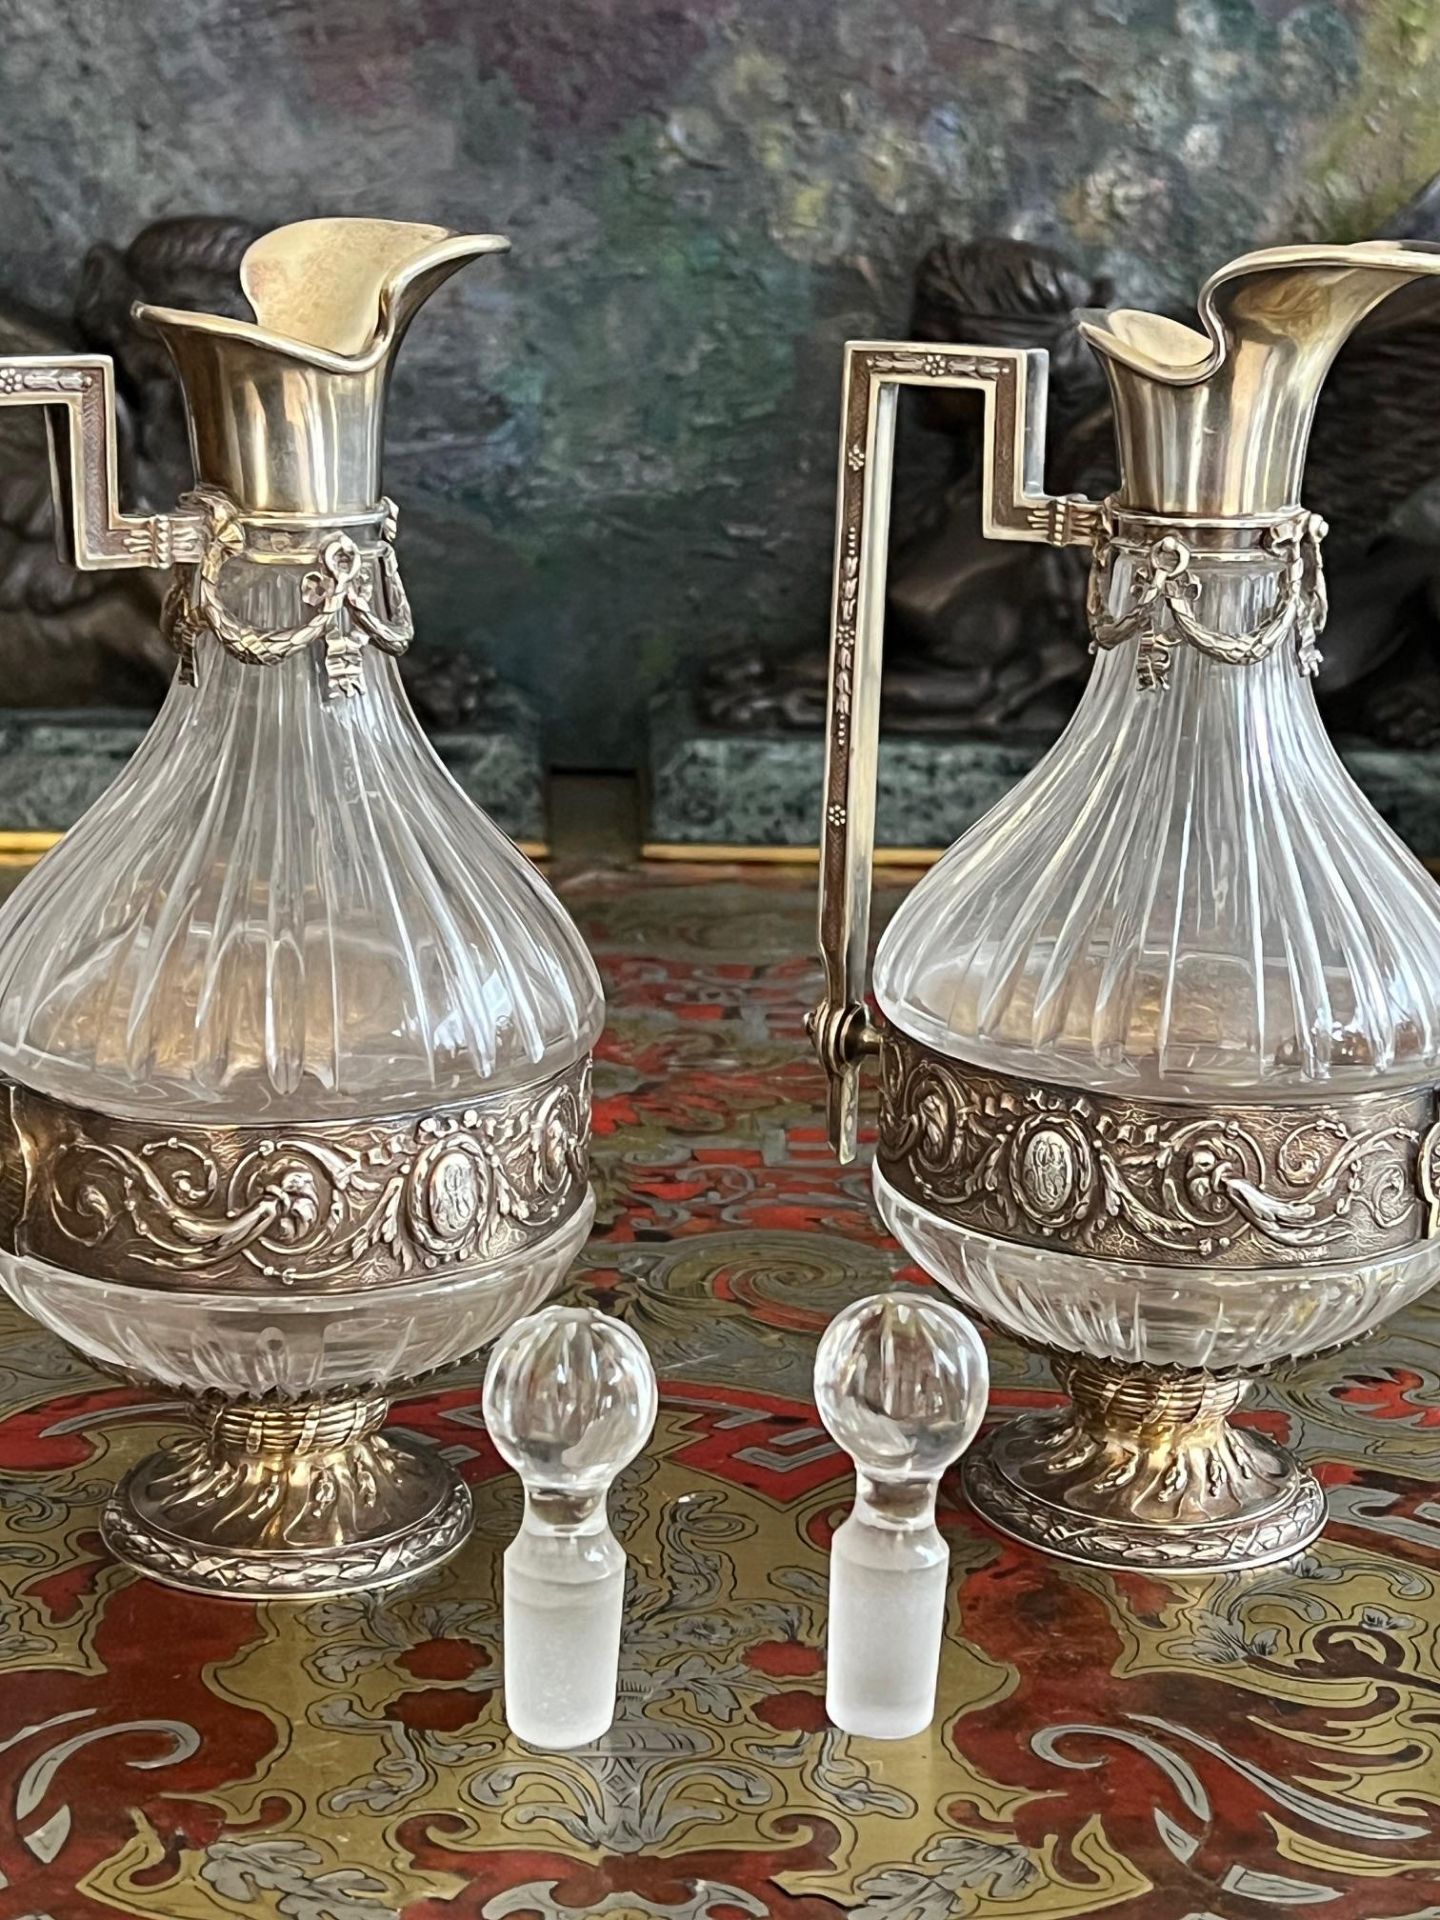 A PAIR OF 19TH CENTURY FRENCH SILVER AND GLASS LIQUOR JUGS - Image 4 of 7